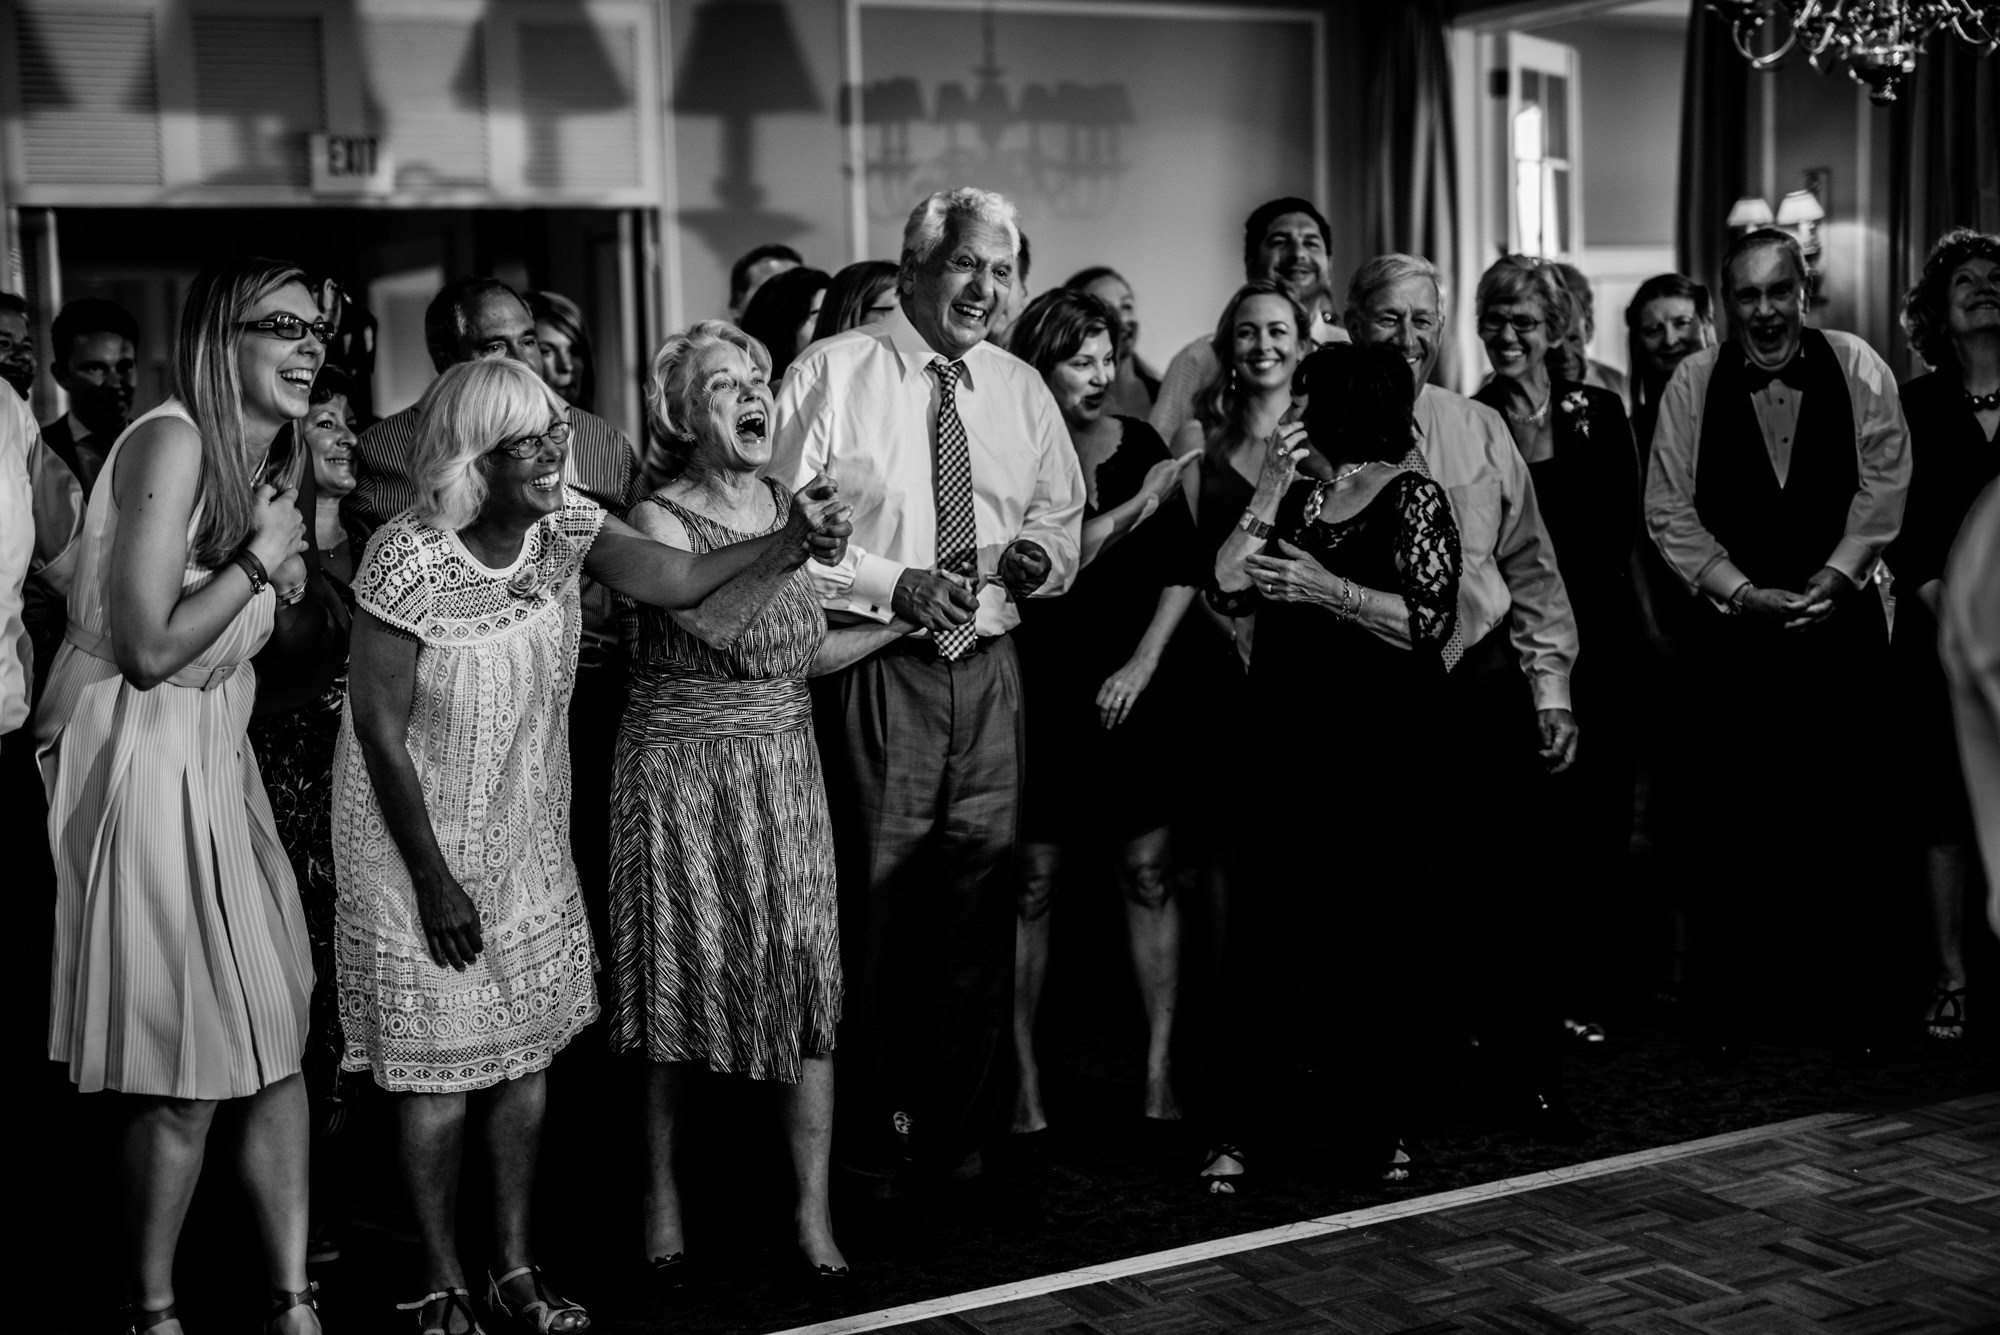 Guests clap and cheer for the longest married couples during the generational dance portion of Joelle and Ryan's wedding reception. Seattle Tennis Club, summer 2016. Photo by Seattle Wedding Photographers Jennifer Tai Photo Artistry.